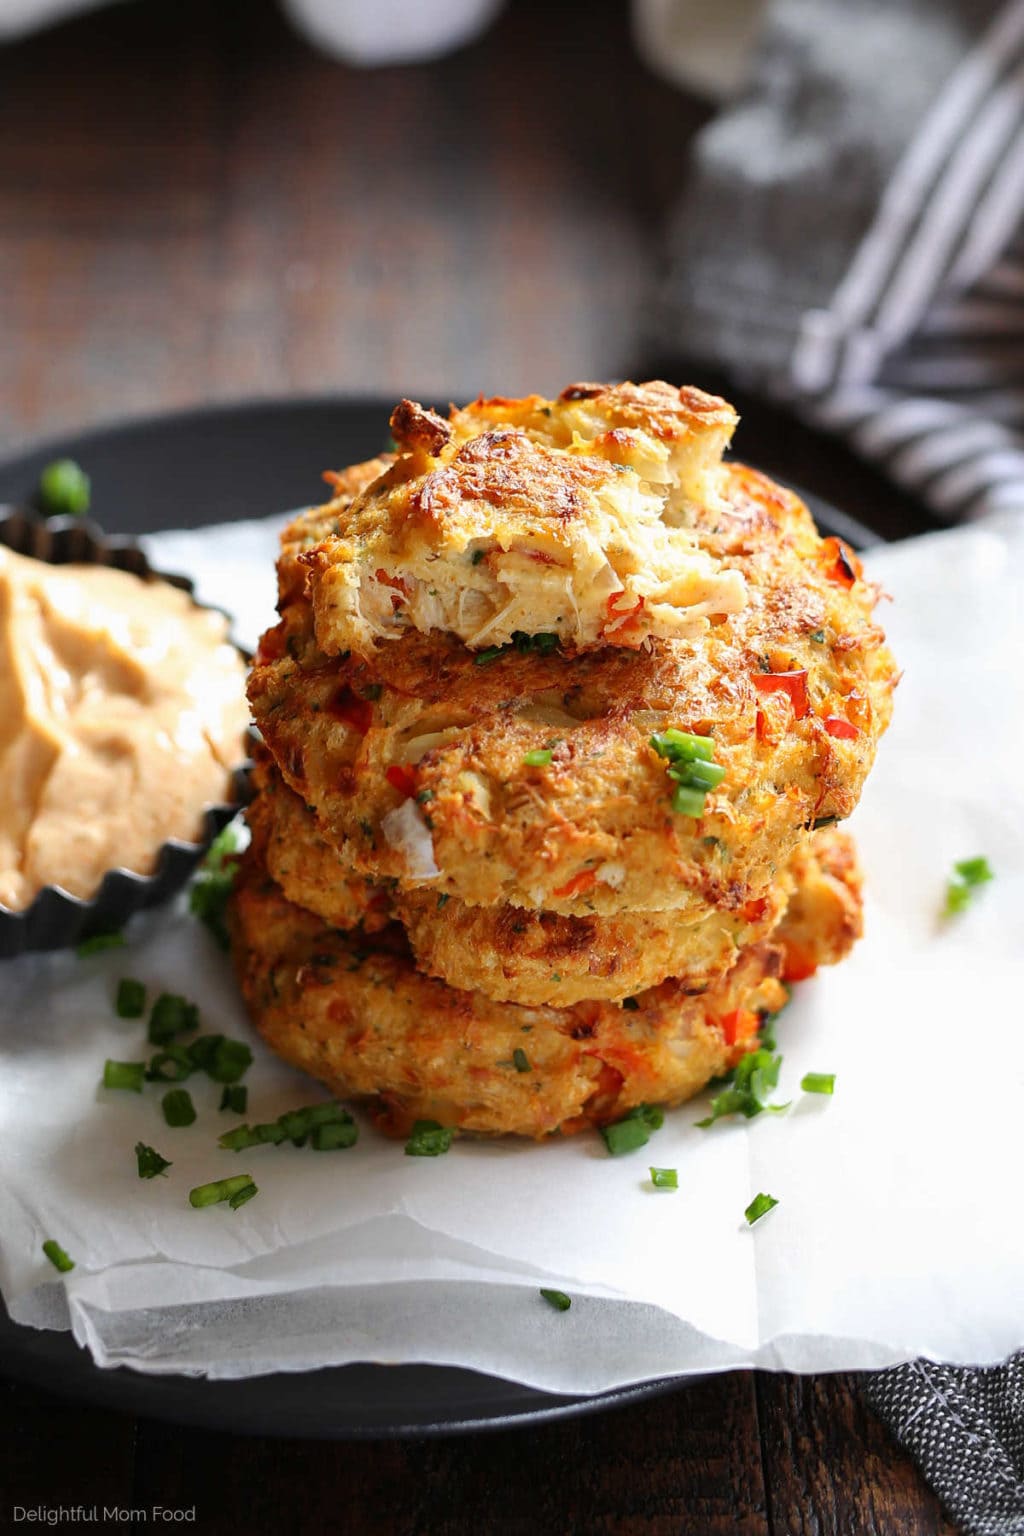 Baked Gluten-Free Crab Cakes With Spicy Aioli - Delightful Mom Food